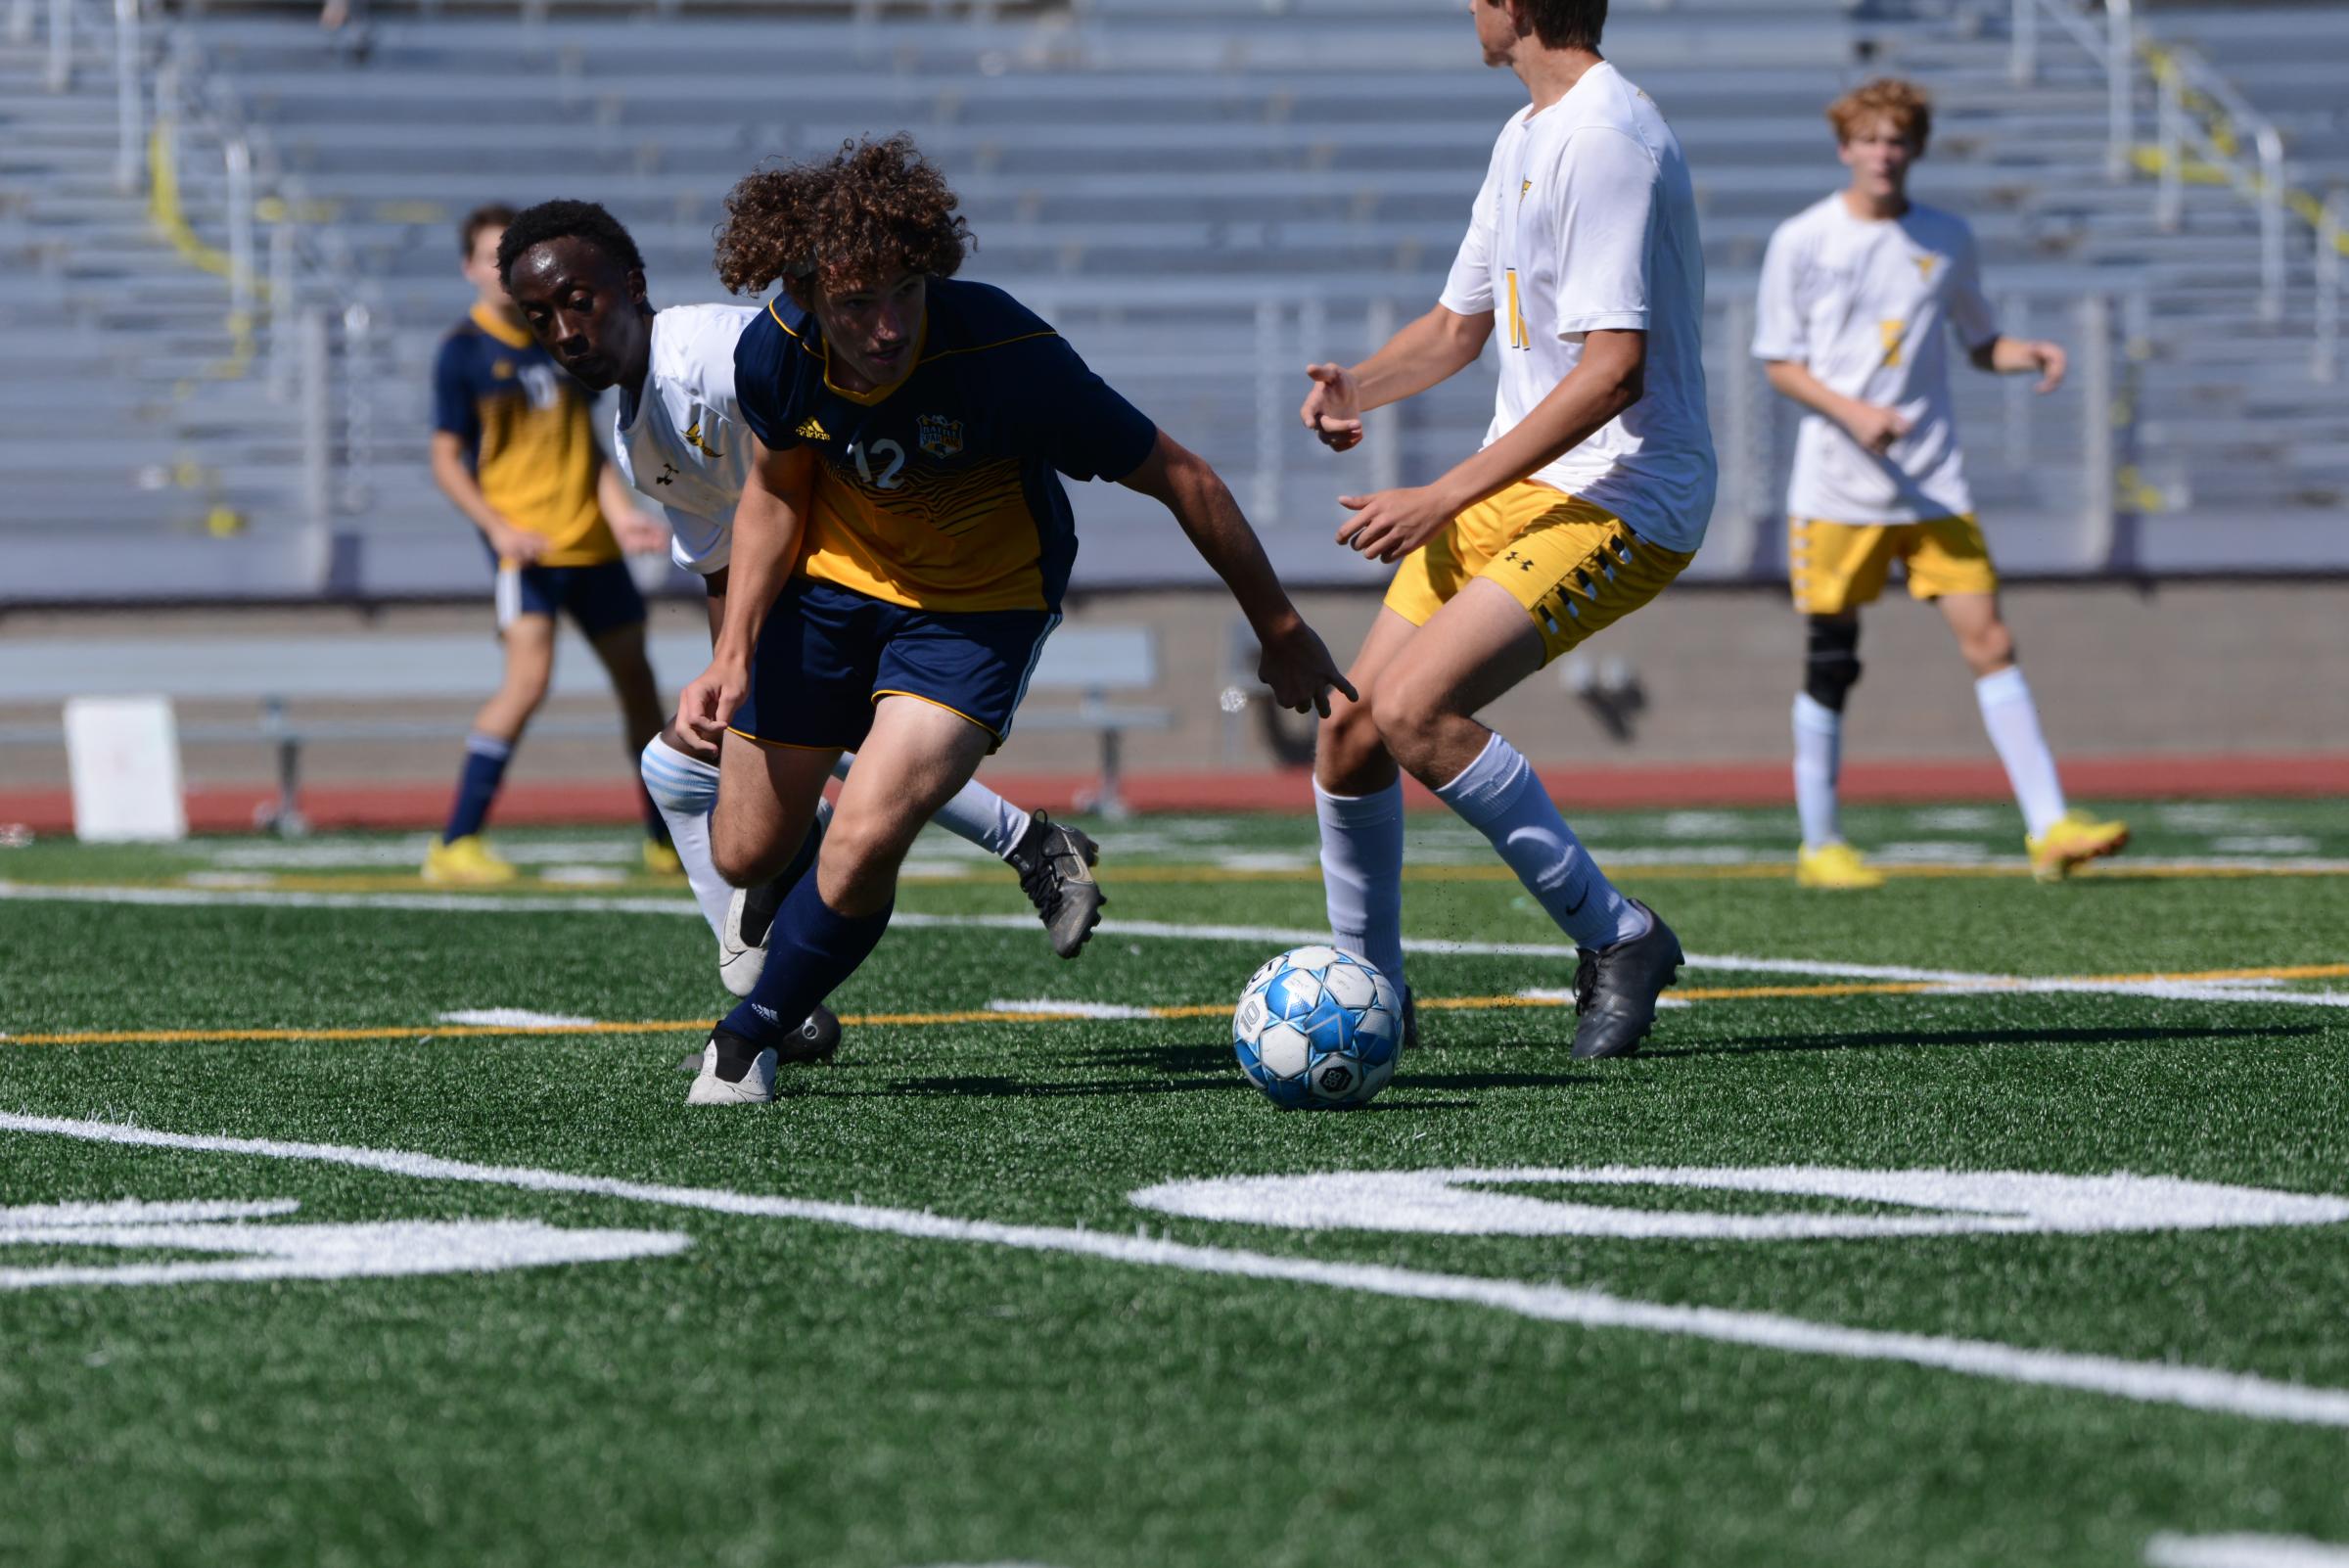 Battle junior C.J. McGuire kicks the ball past two Fulton defenders at the high school boys soccer game on Saturday, Oct. 1, 2022 at Muriel Battle...